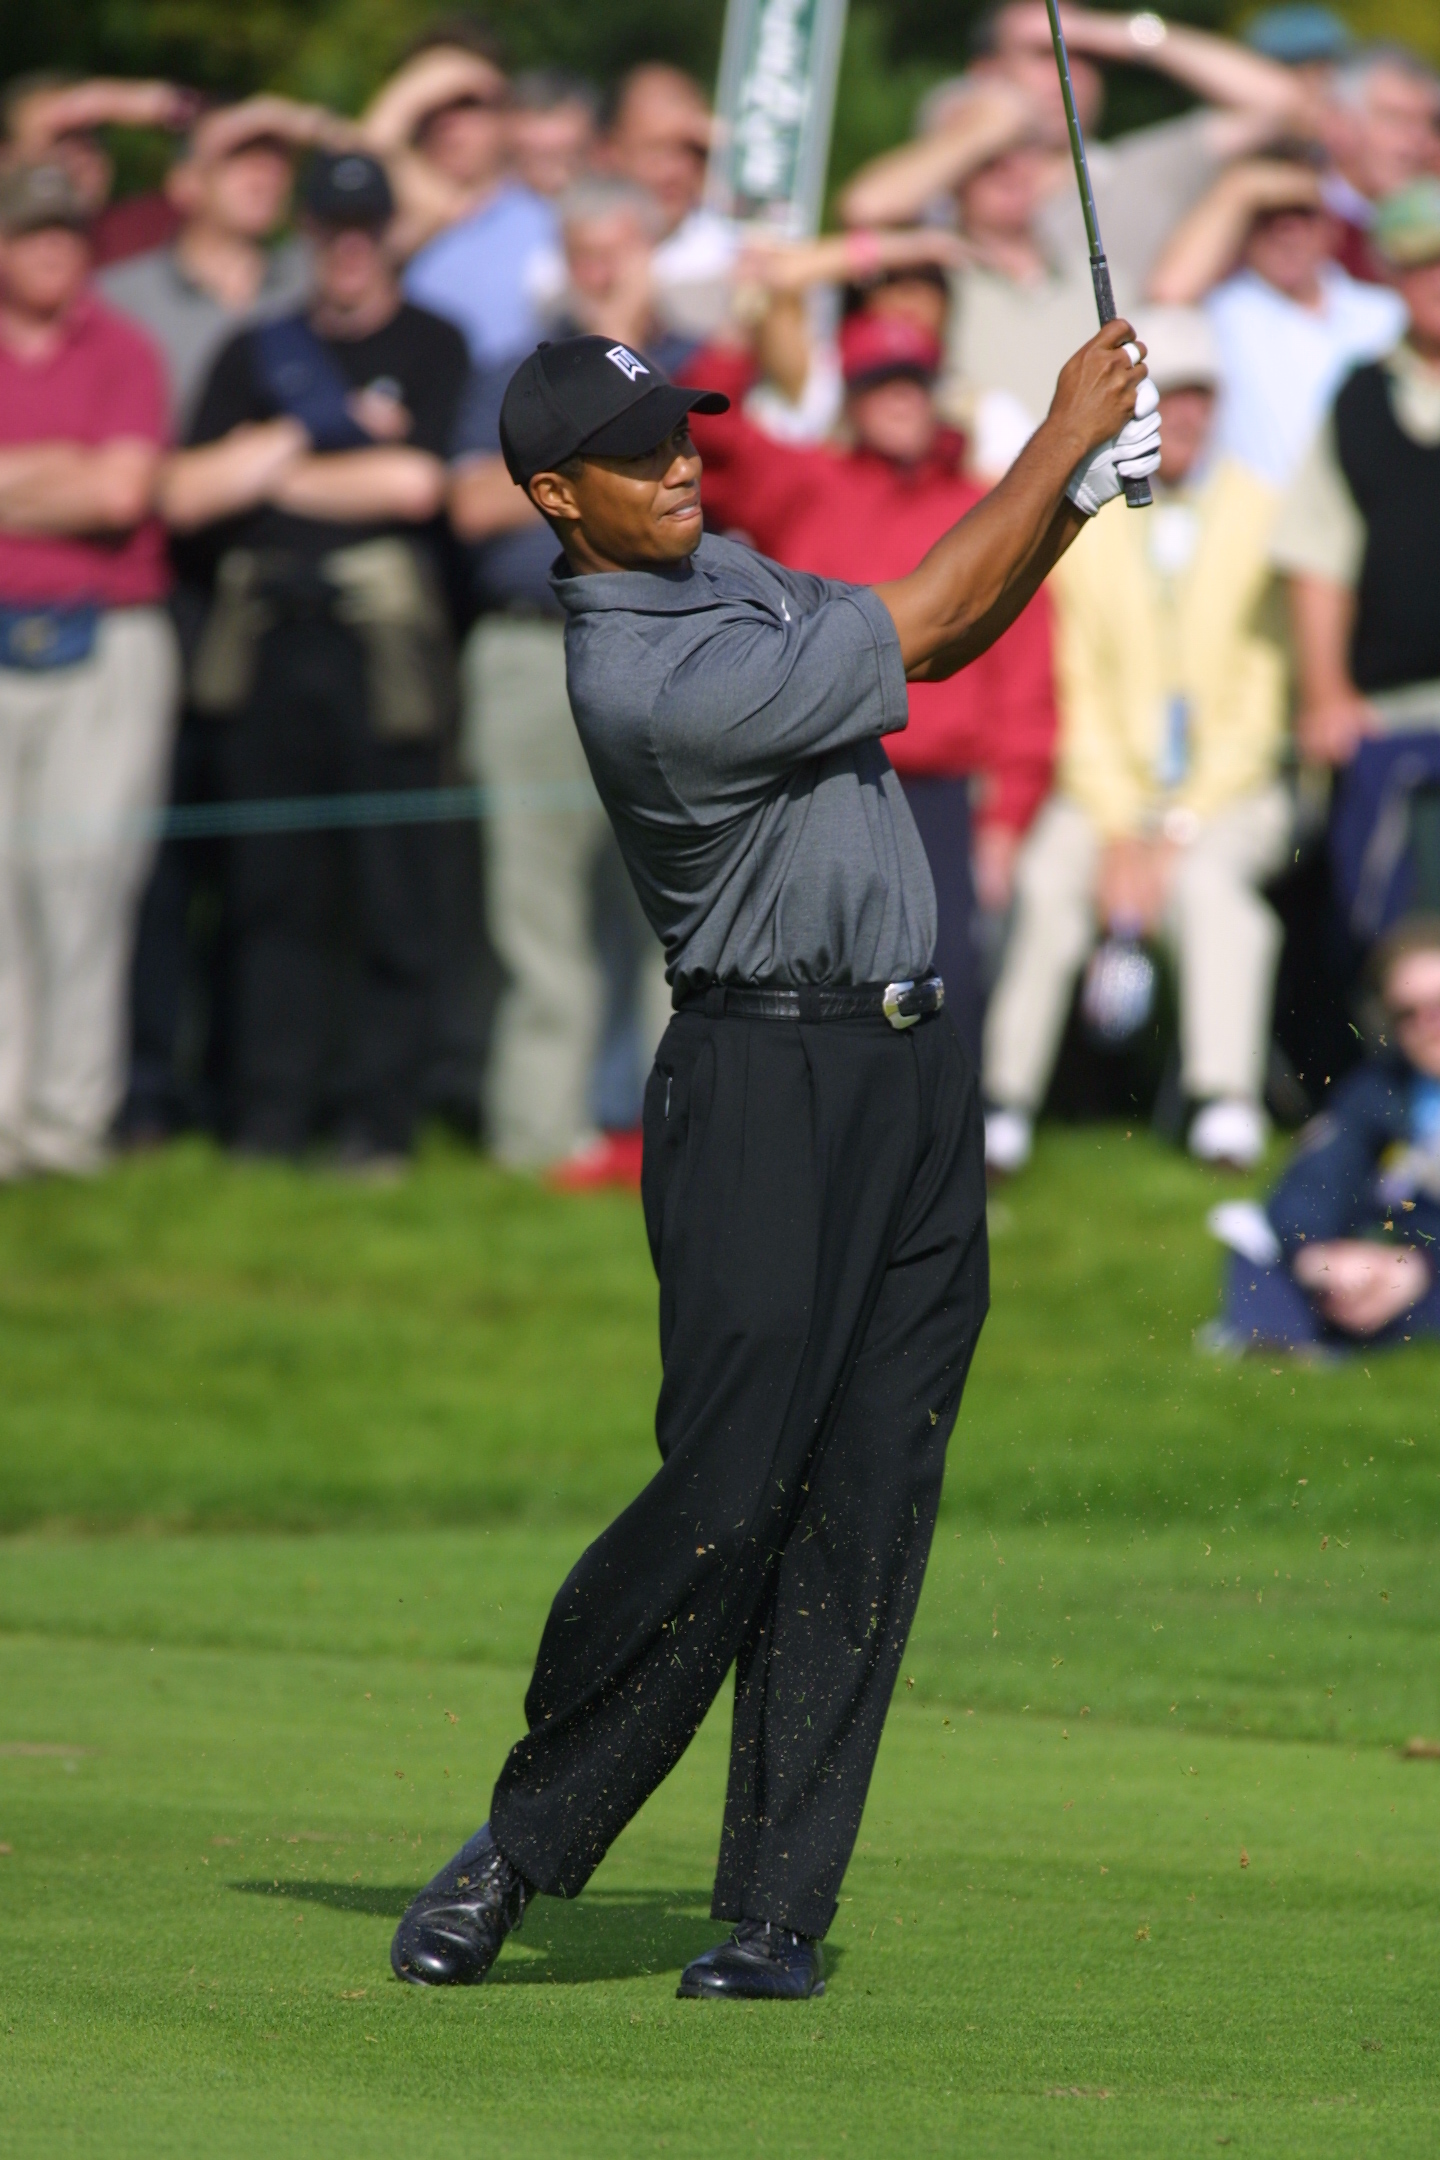 Tiger Woods playing at Mount Juliet Golf Course